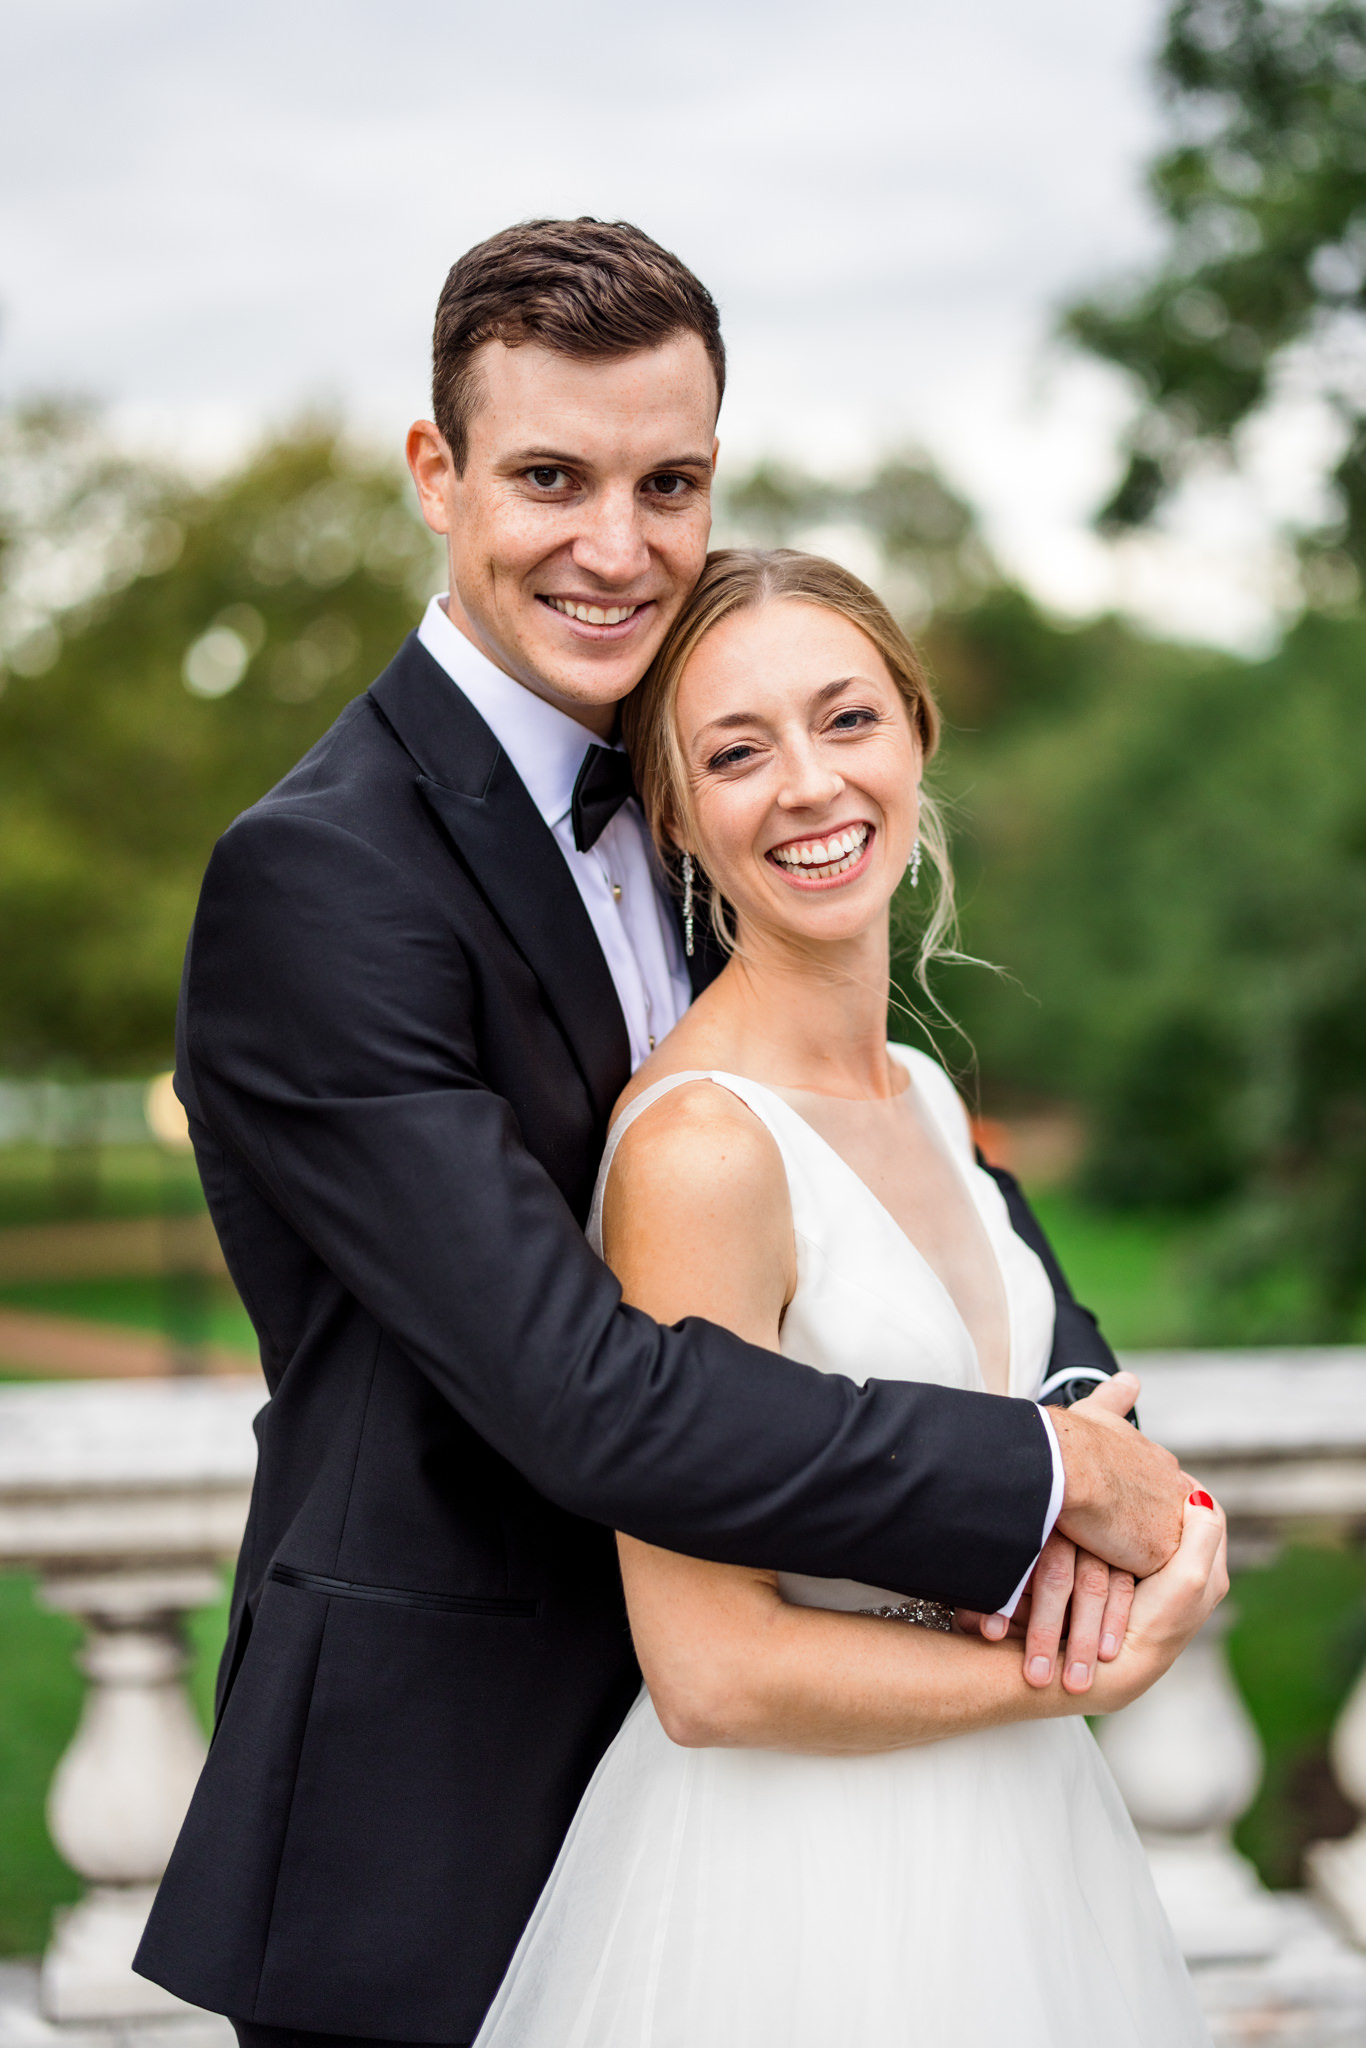 man wrapping arms around woman on wedding day